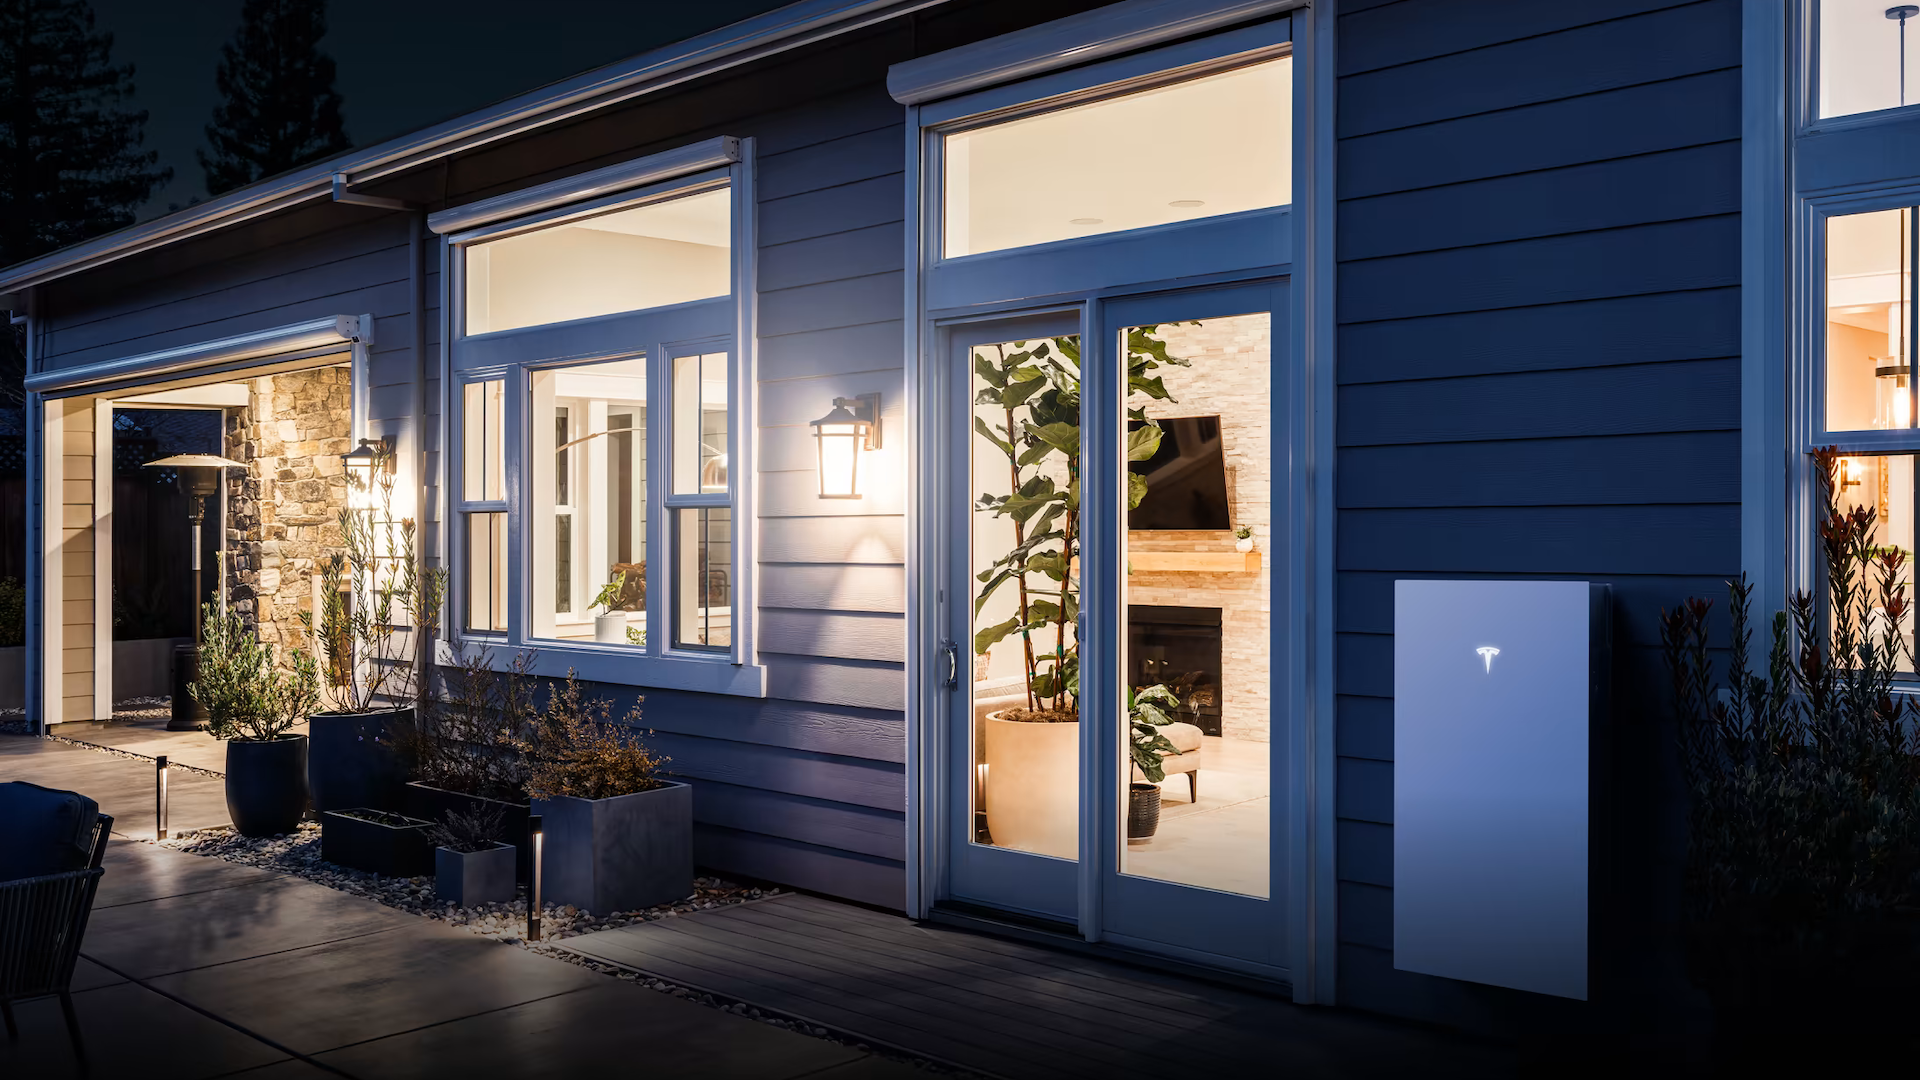 Tesla Powerwall 3 at Dusk with House lights on in the background